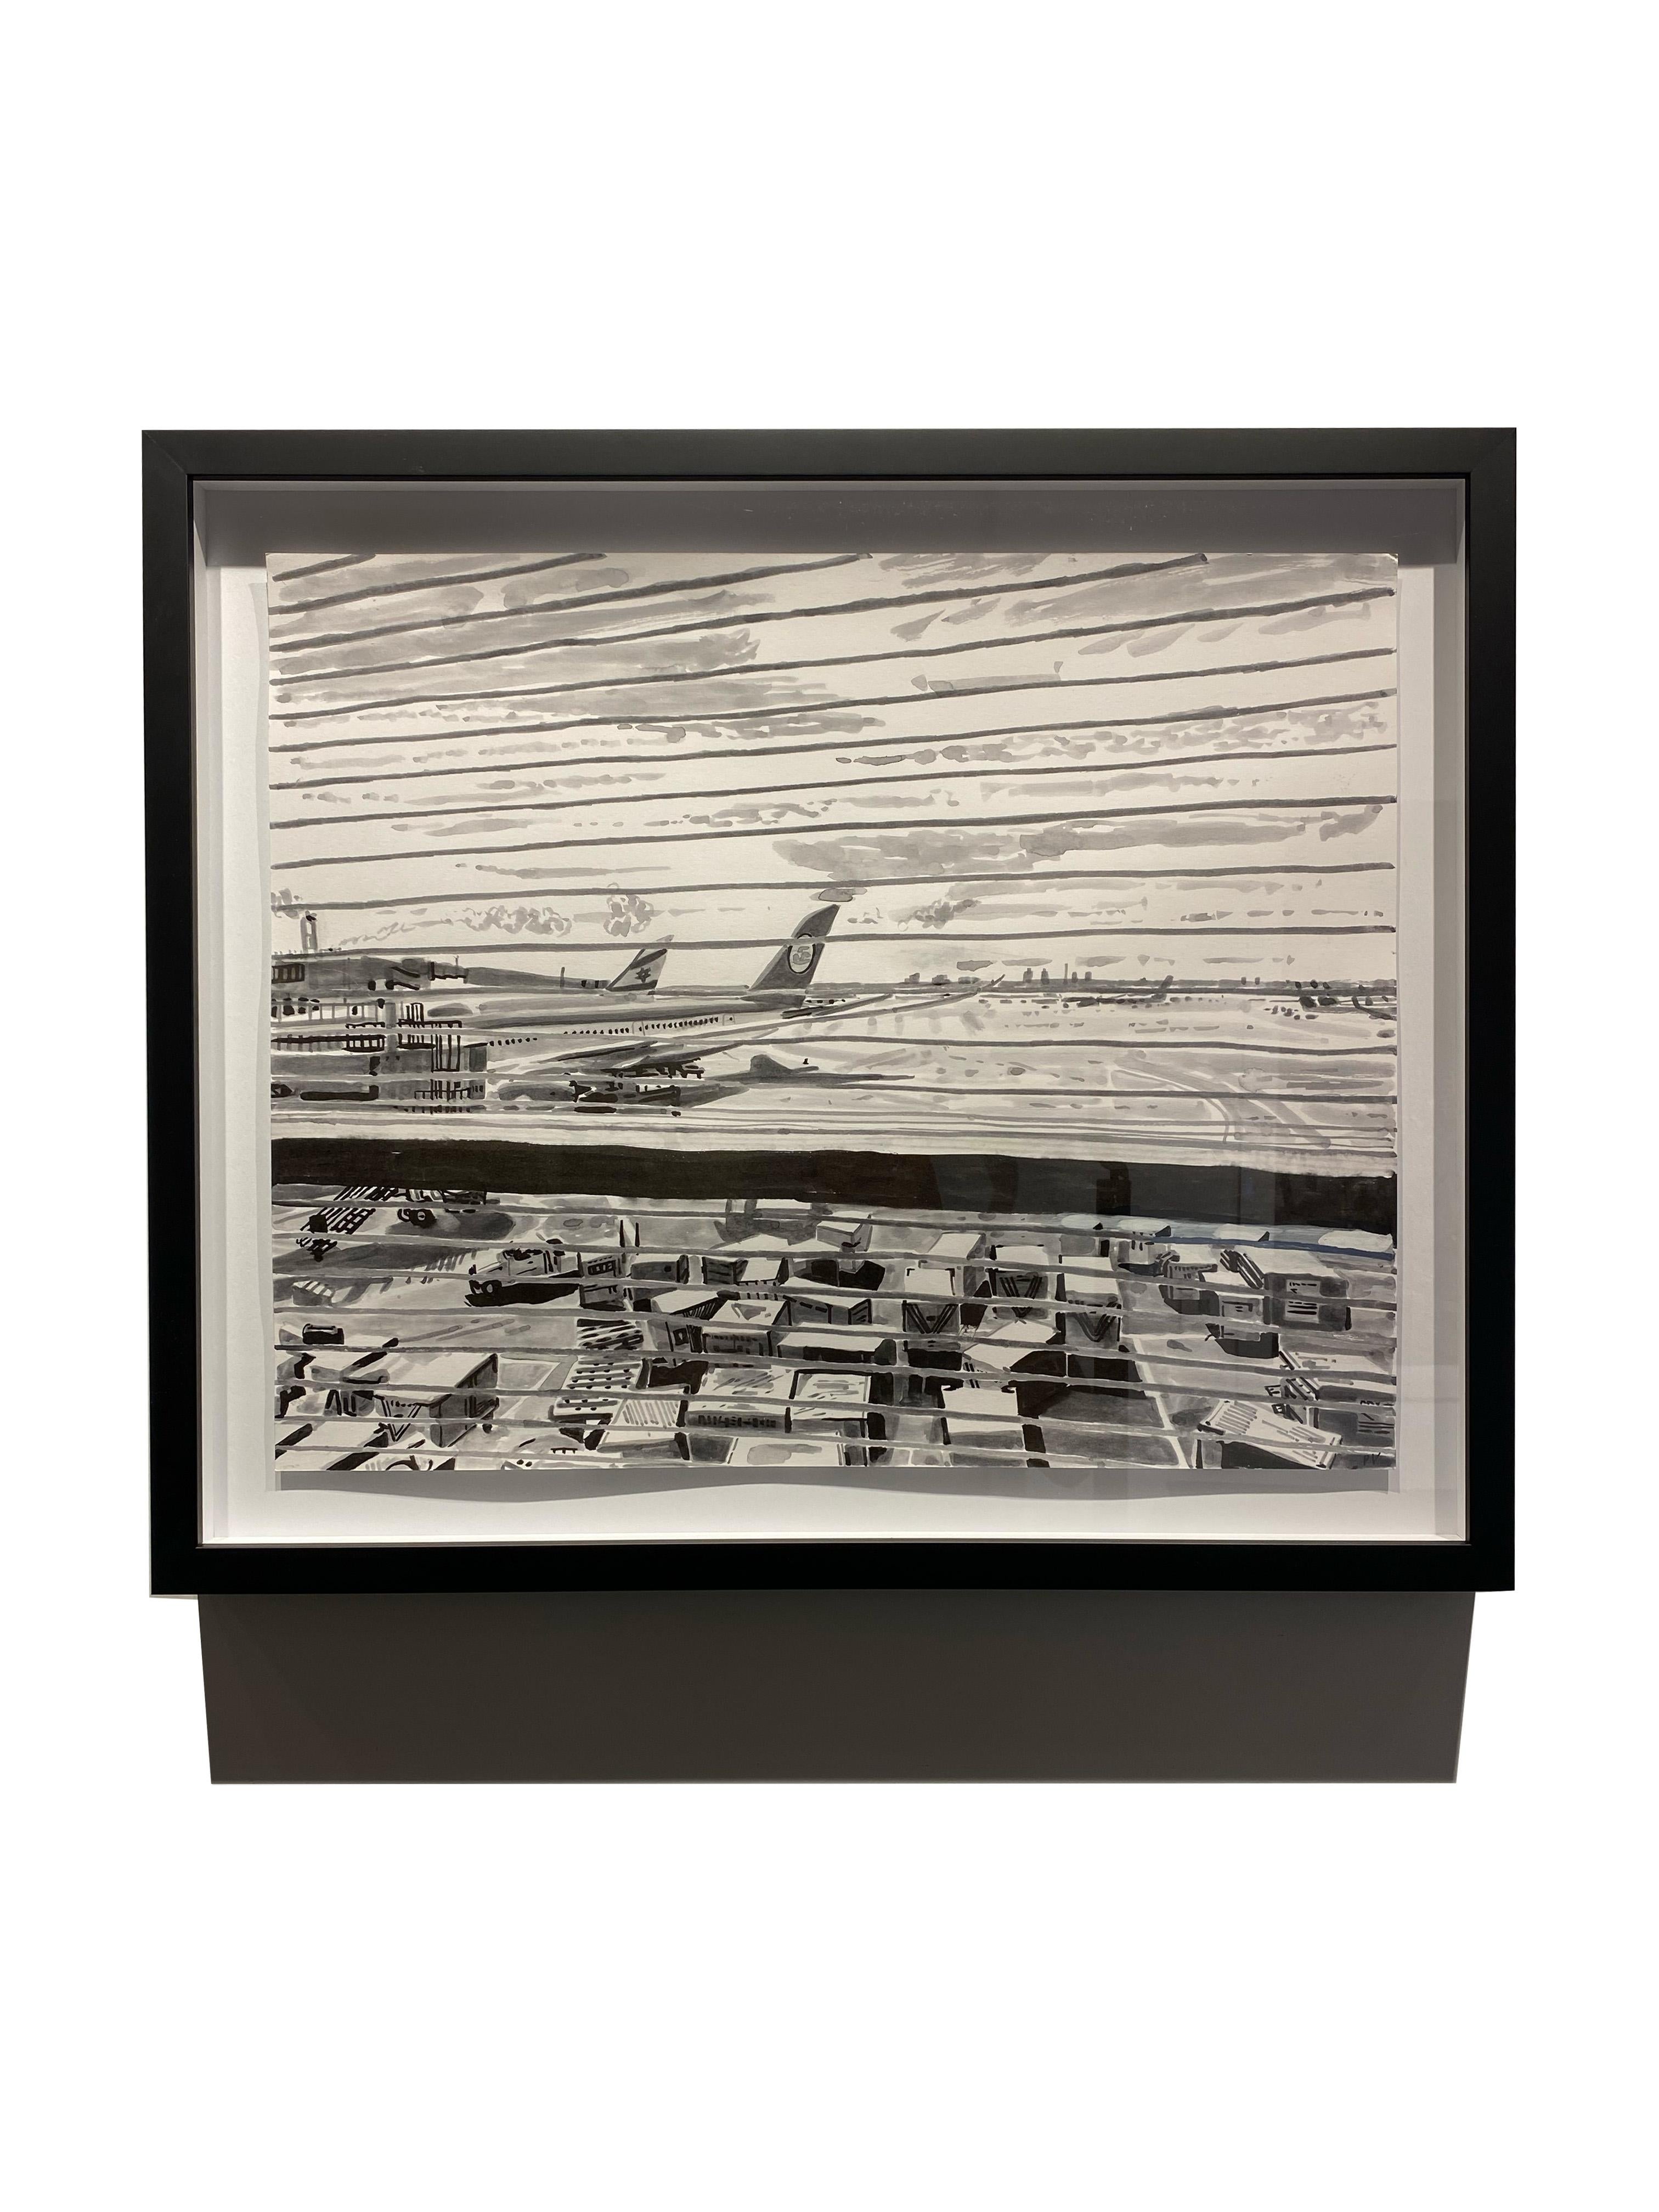 Airport - Chicago's O'Hare Field, Acrylic & Ink on Paper, Framed - Modern Painting by Patrick Vale